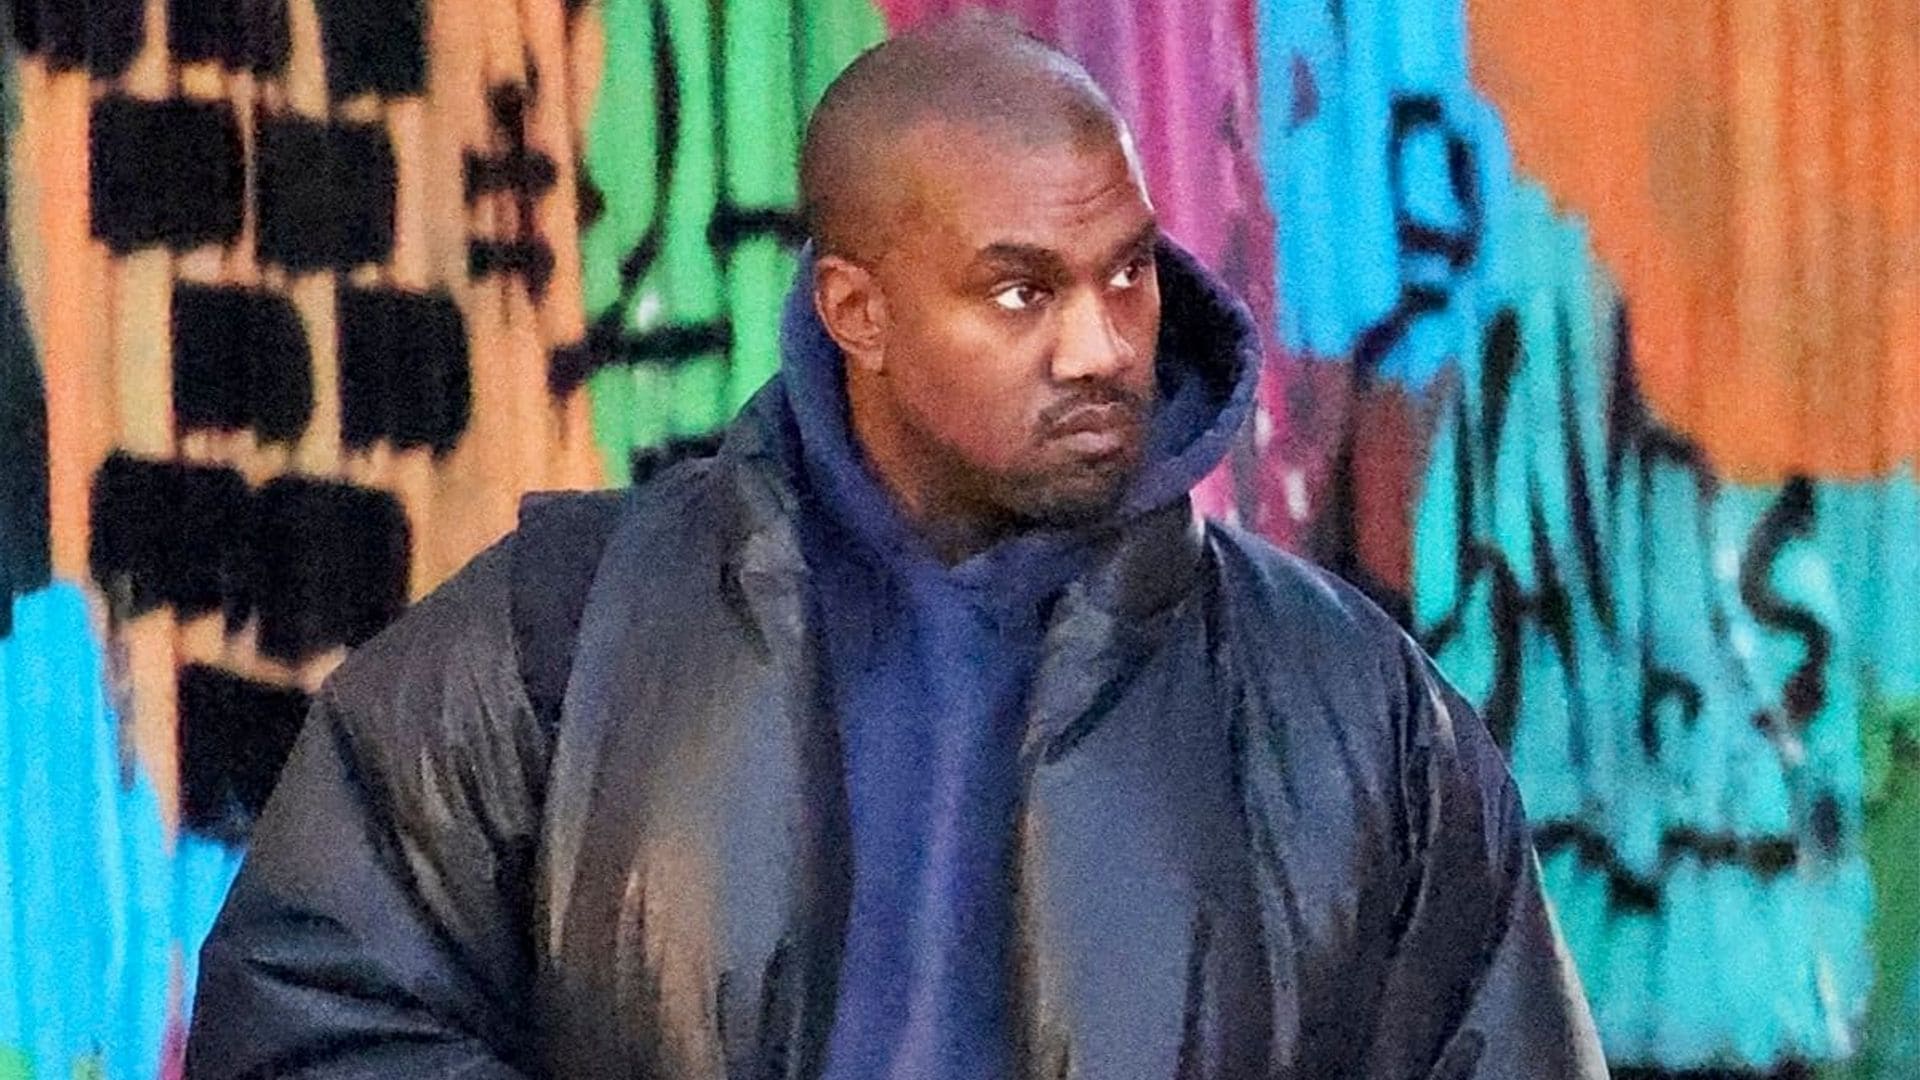 Kanye West is back in LA to spend time with his kids